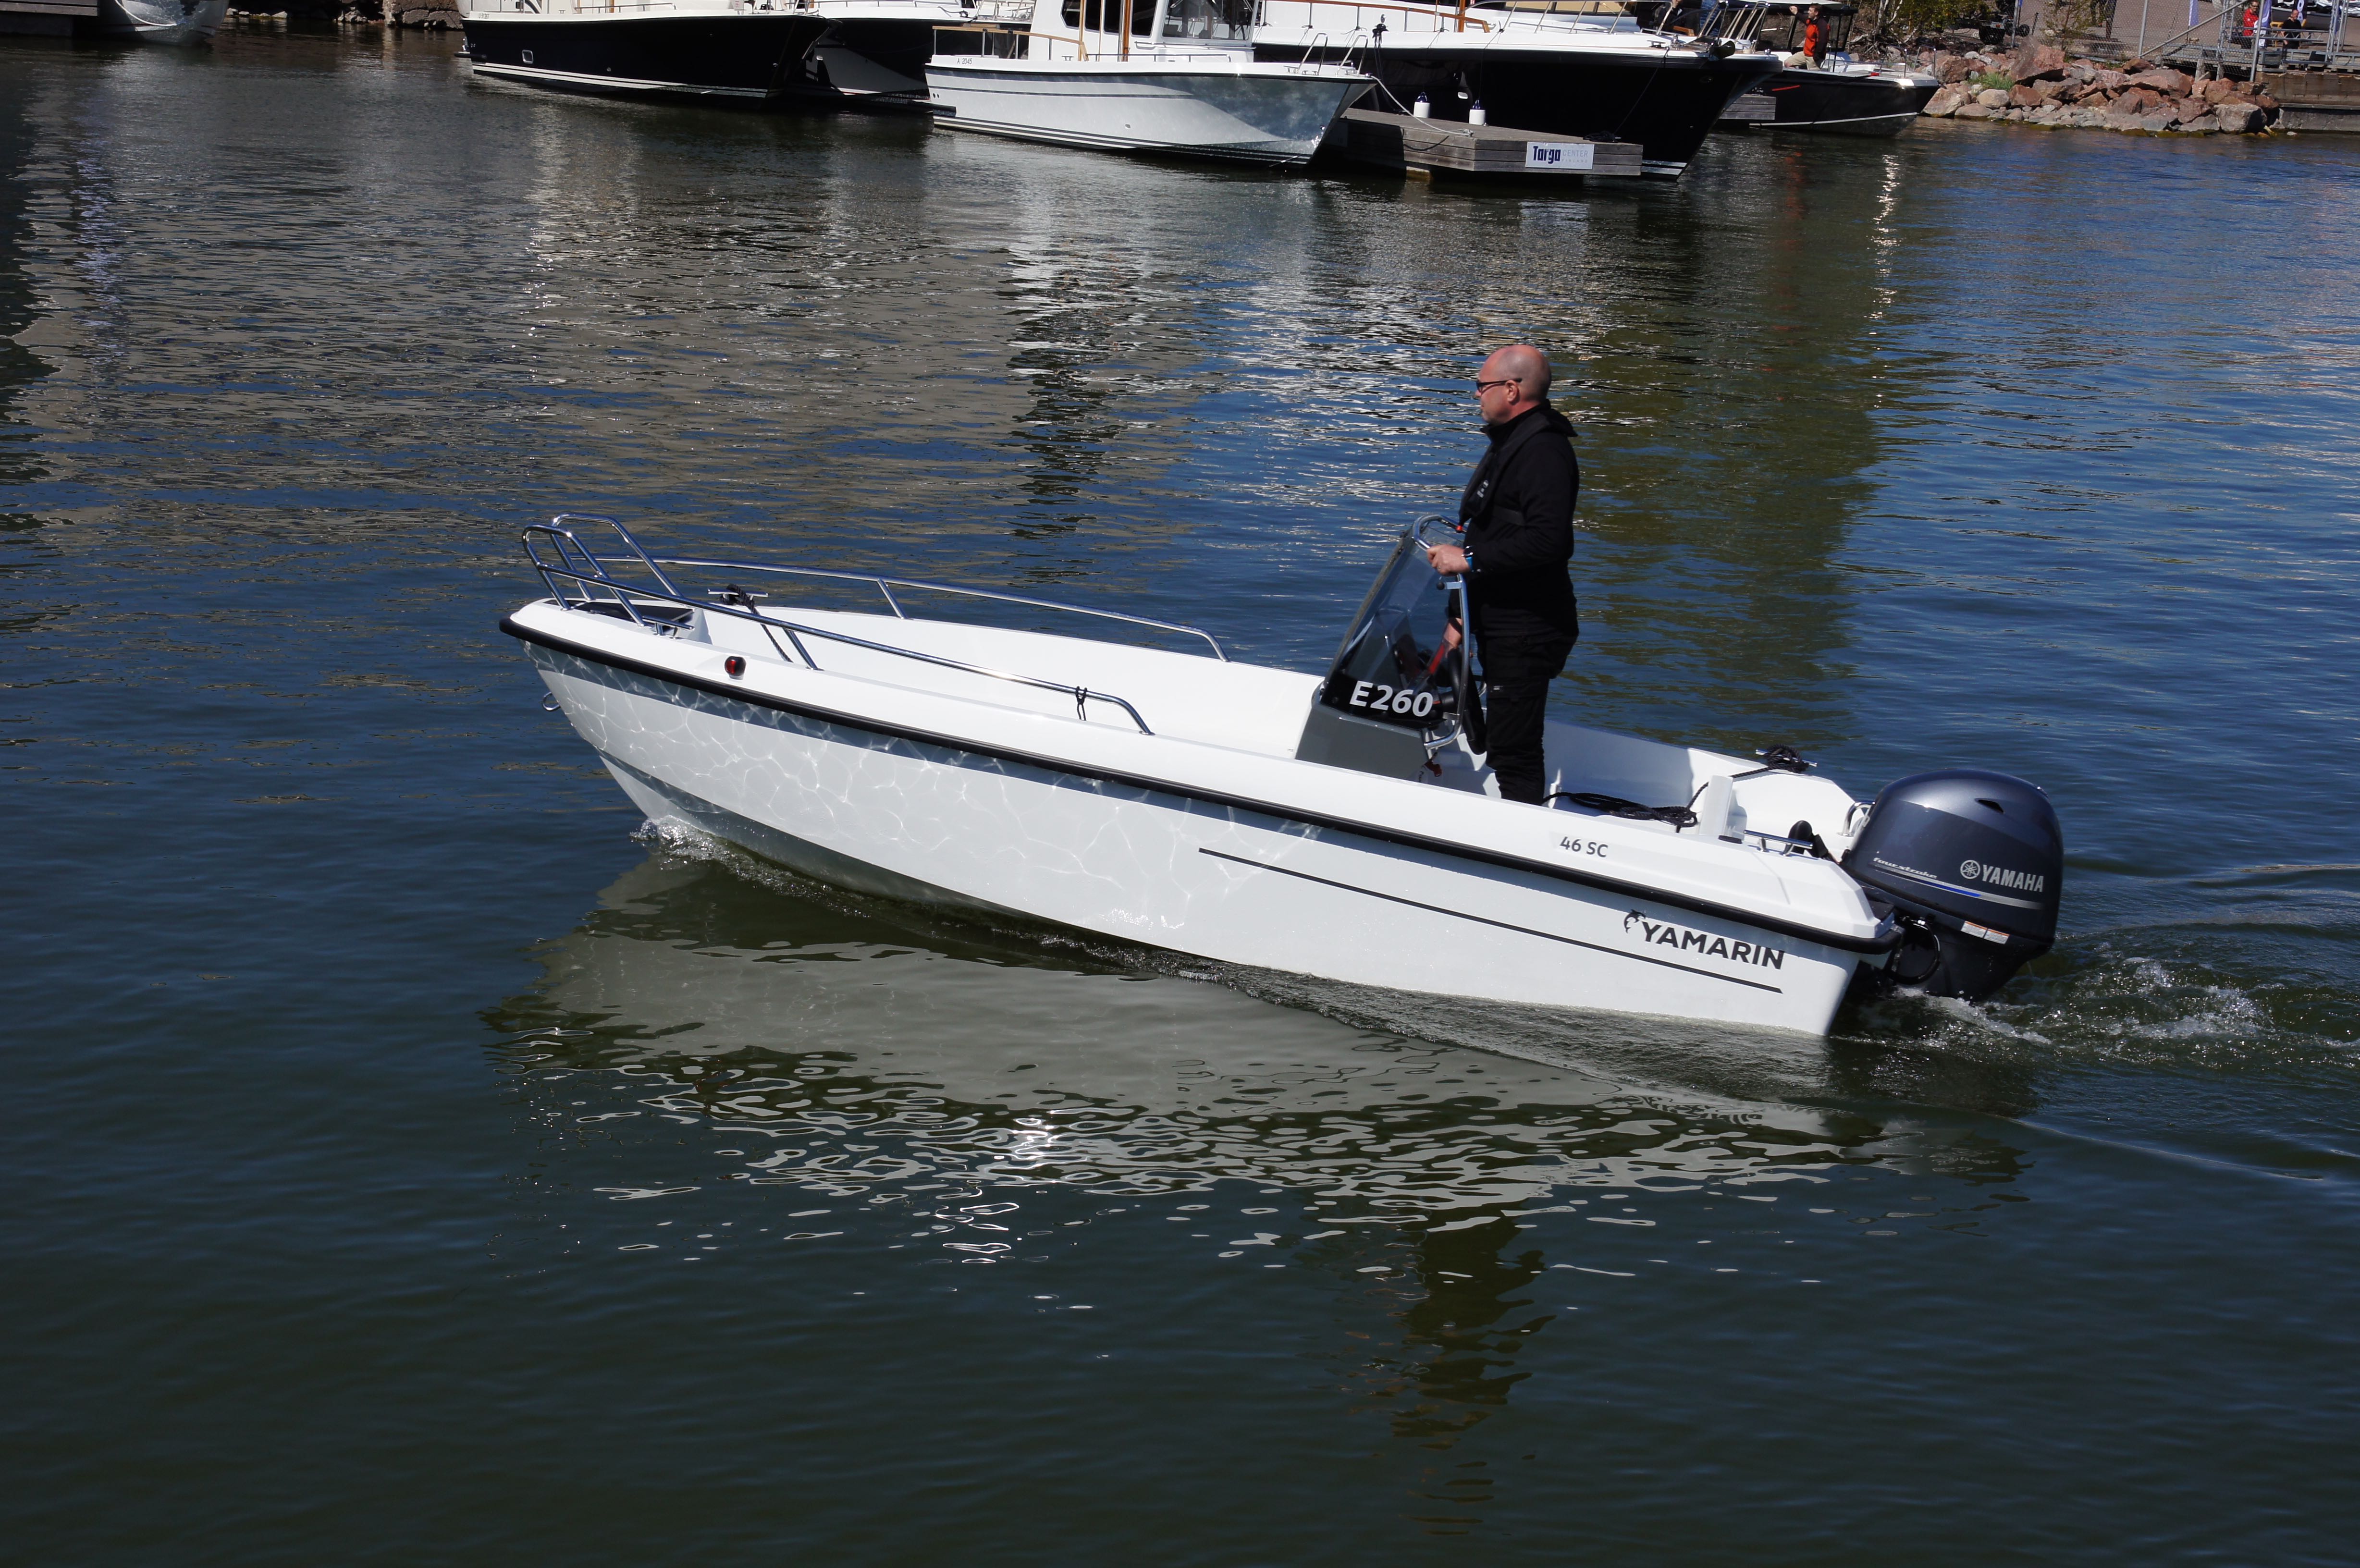 Yamarin 46 SC will be shown at the Southampton Boat Show